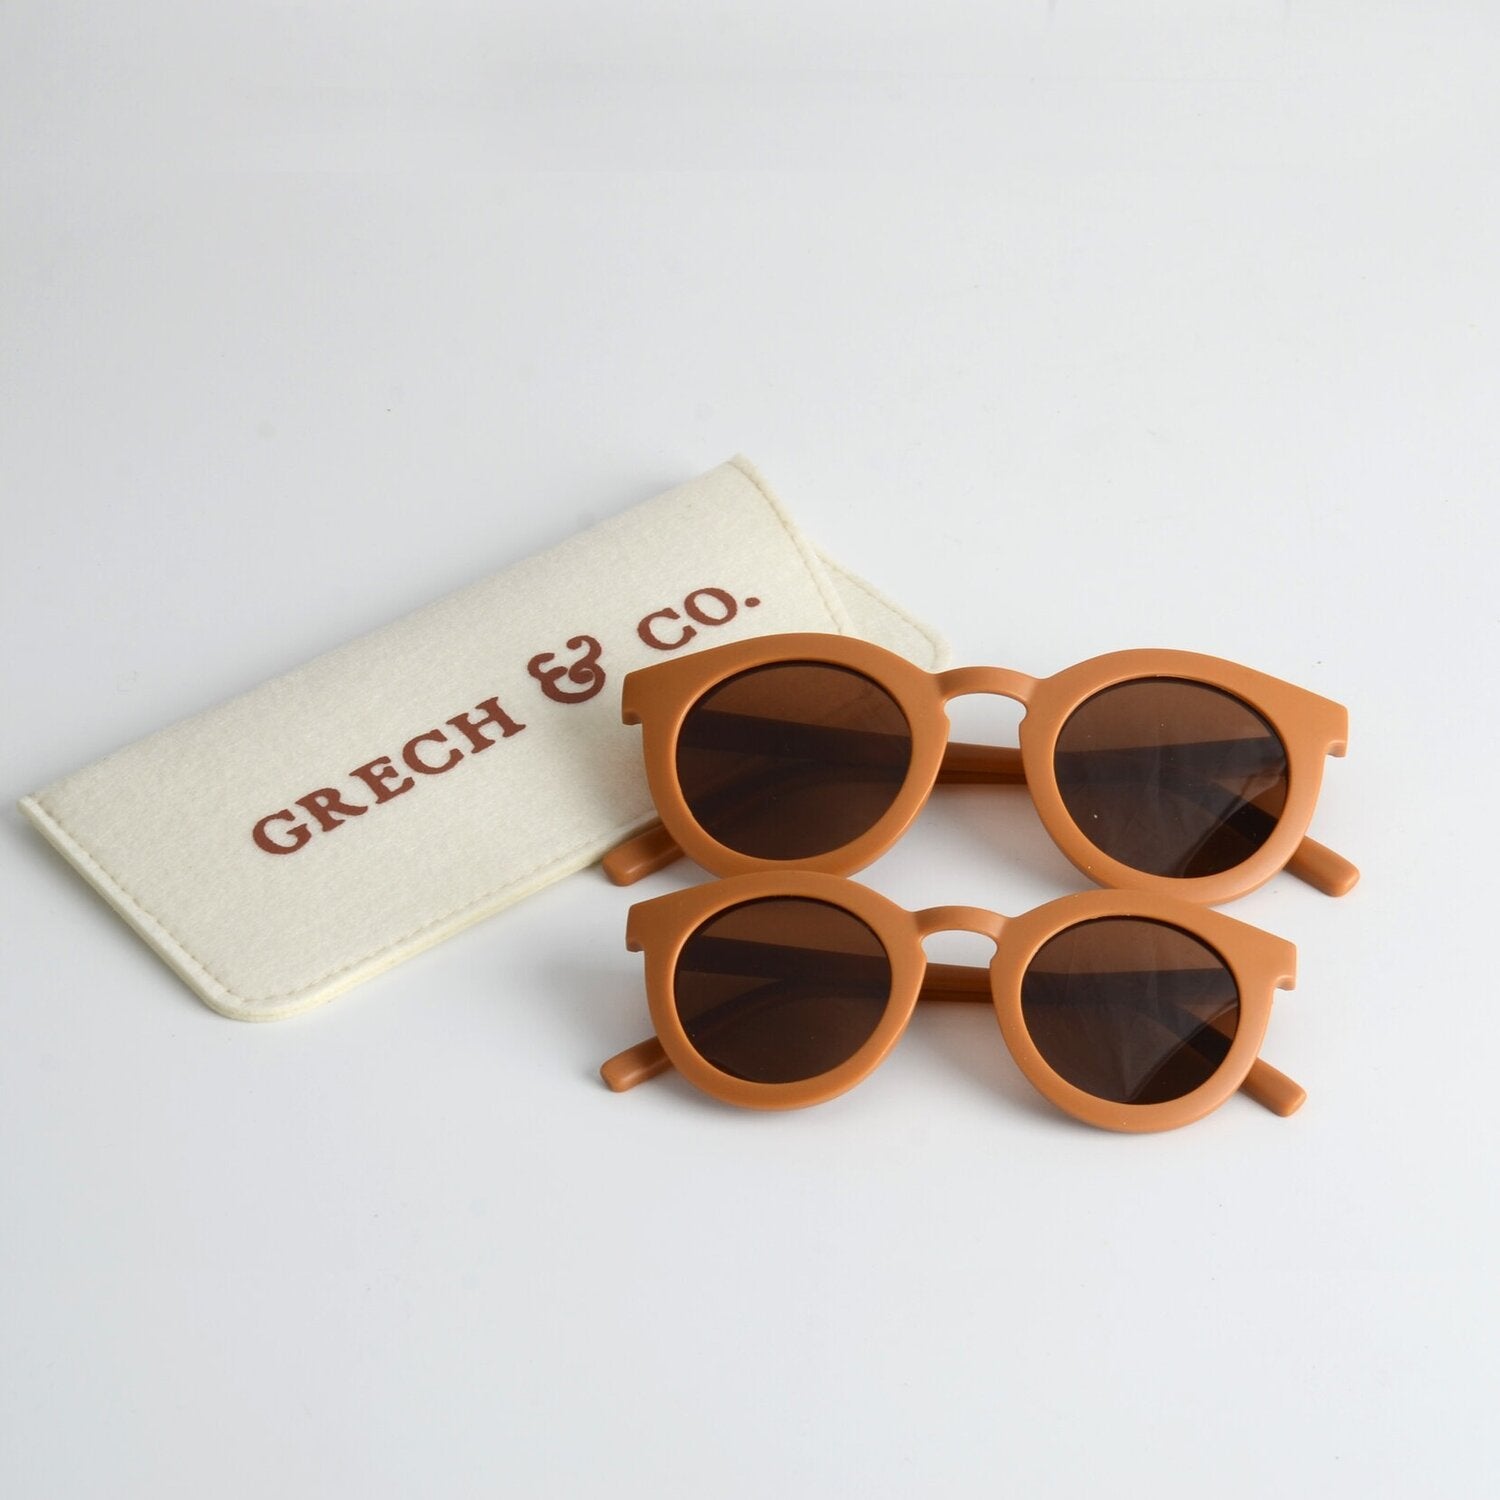 Grech and Co. Sustainable Sunglasses - Spice (LTP - no case)